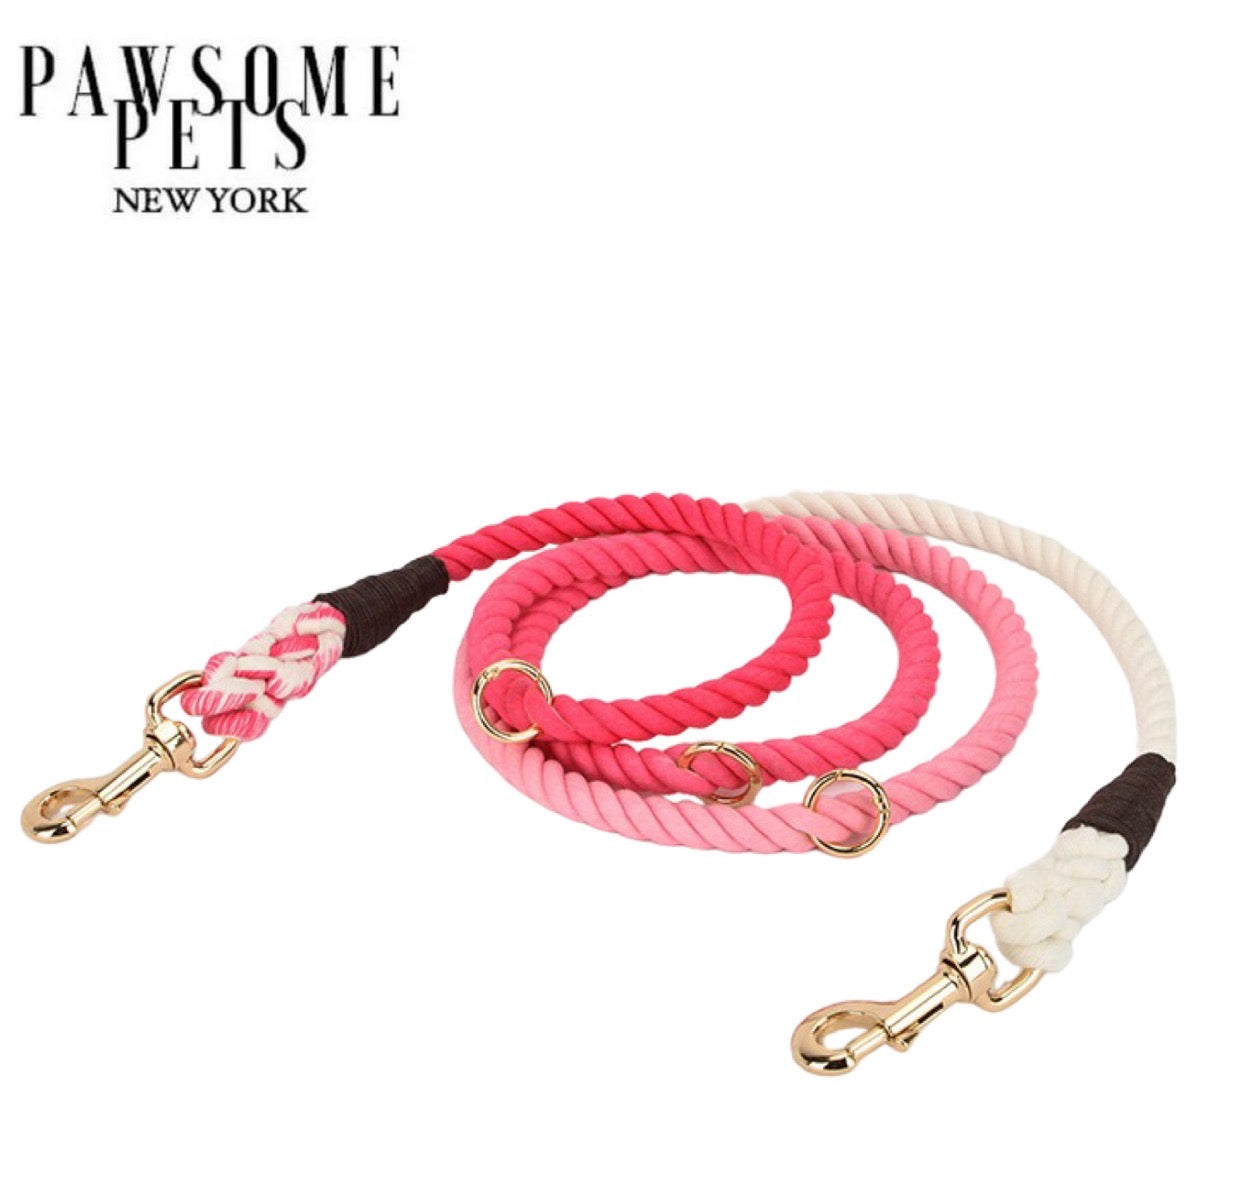 HANDS FREE DOG ROPE LEASH - OMBRE ROSE PINK by Pawsome Pets